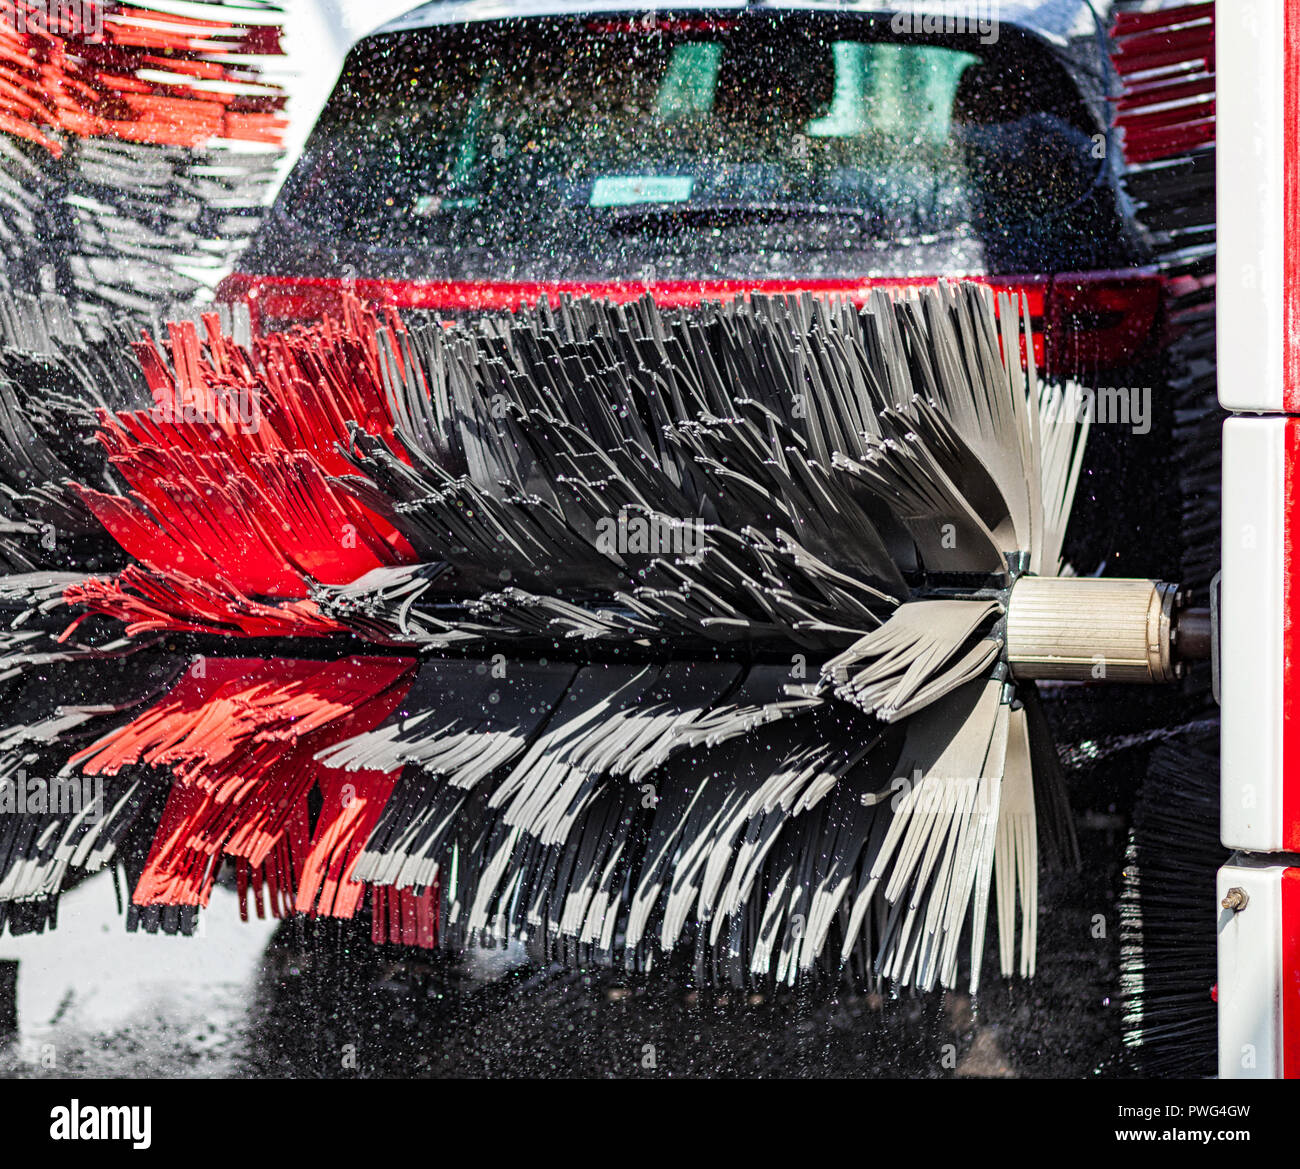 Black car in automatic car wash rotating red and black brush. Washing  vehicle Stock Photo - Alamy